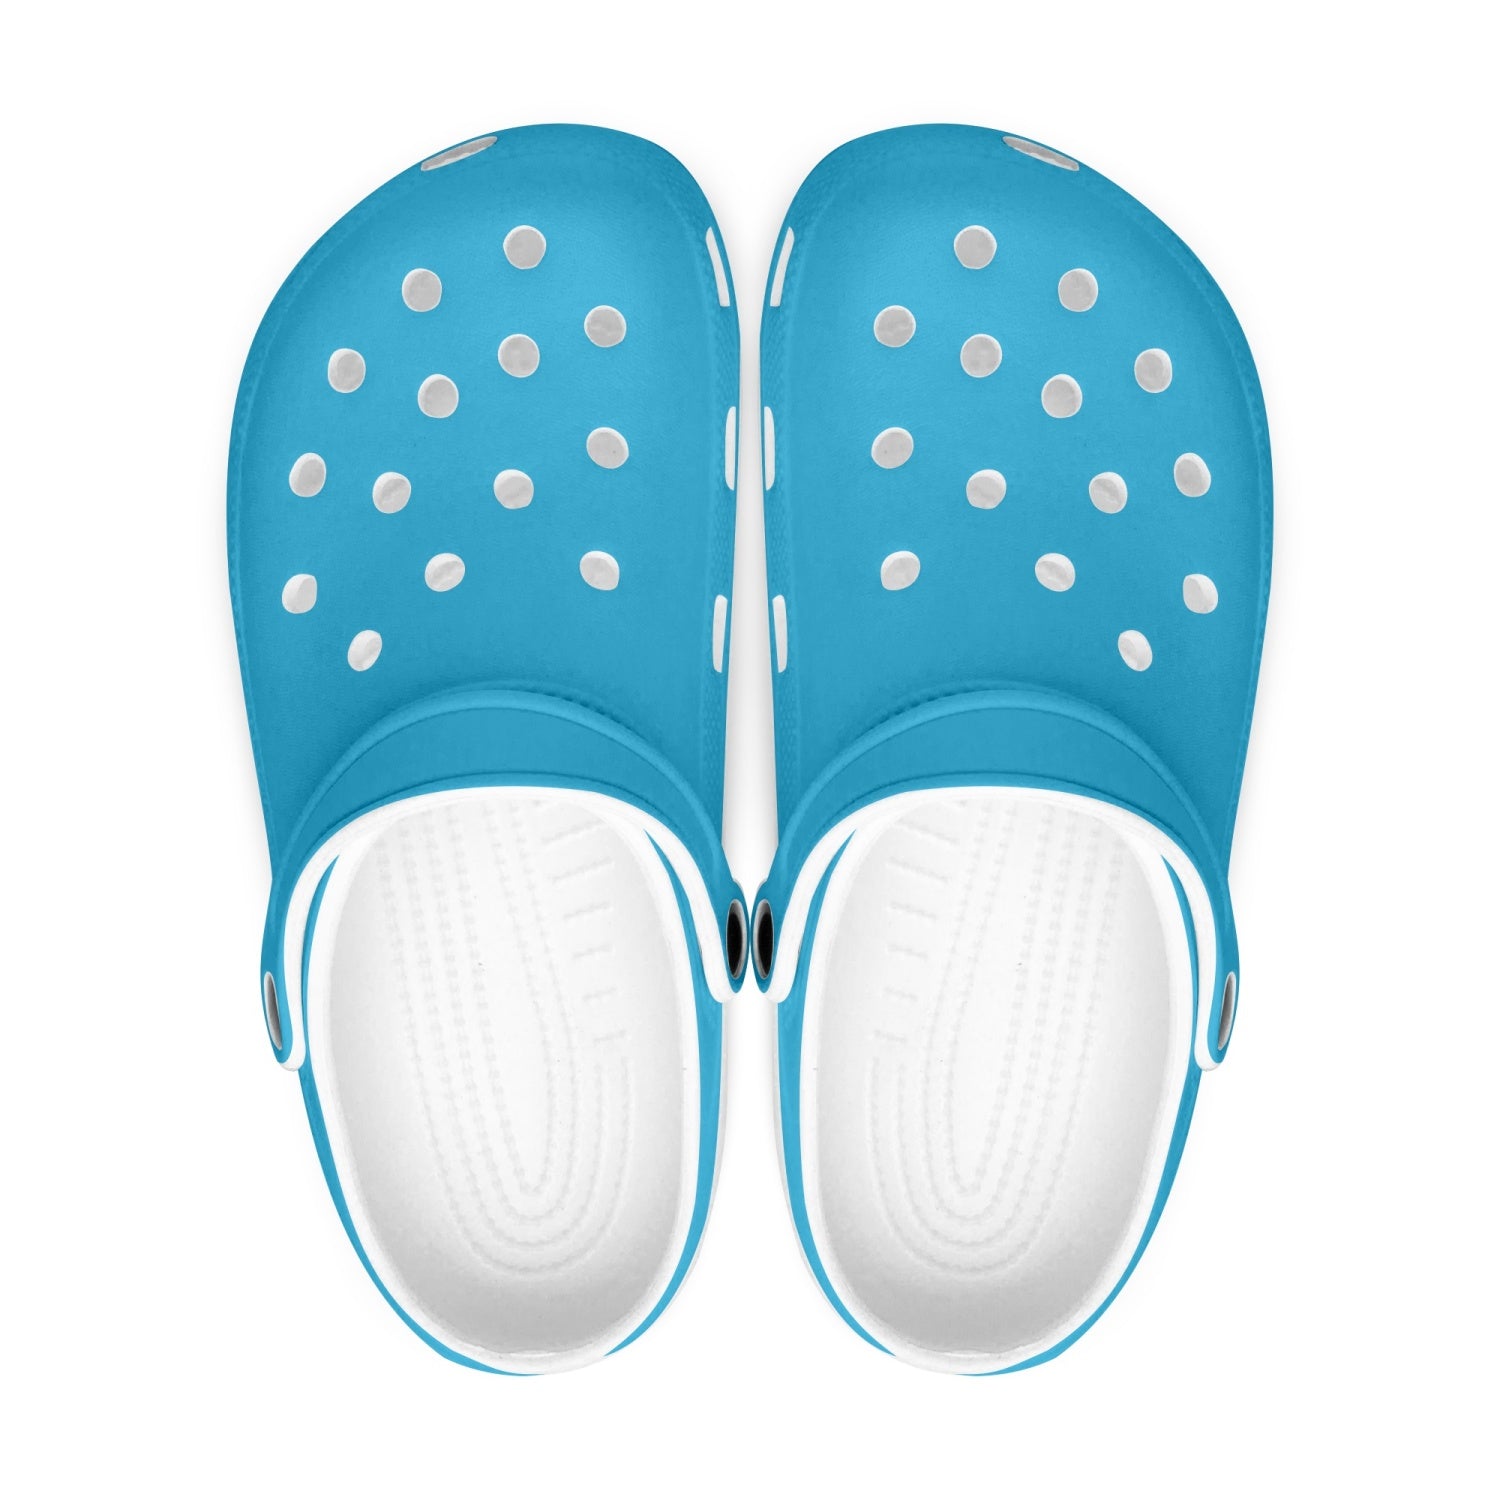 Sky Blue Color Unisex Clogs, Best Solid Blue Color Classic Solid Color Printed Adult's Lightweight Anti-Slip Unisex Extra Comfy Soft Breathable Supportive Clogs Flip Flop Pool Water Beach Slippers Sandals Shoes For Men or Women, Men's US Size: 3.5-12, Women's US Size: 4-12